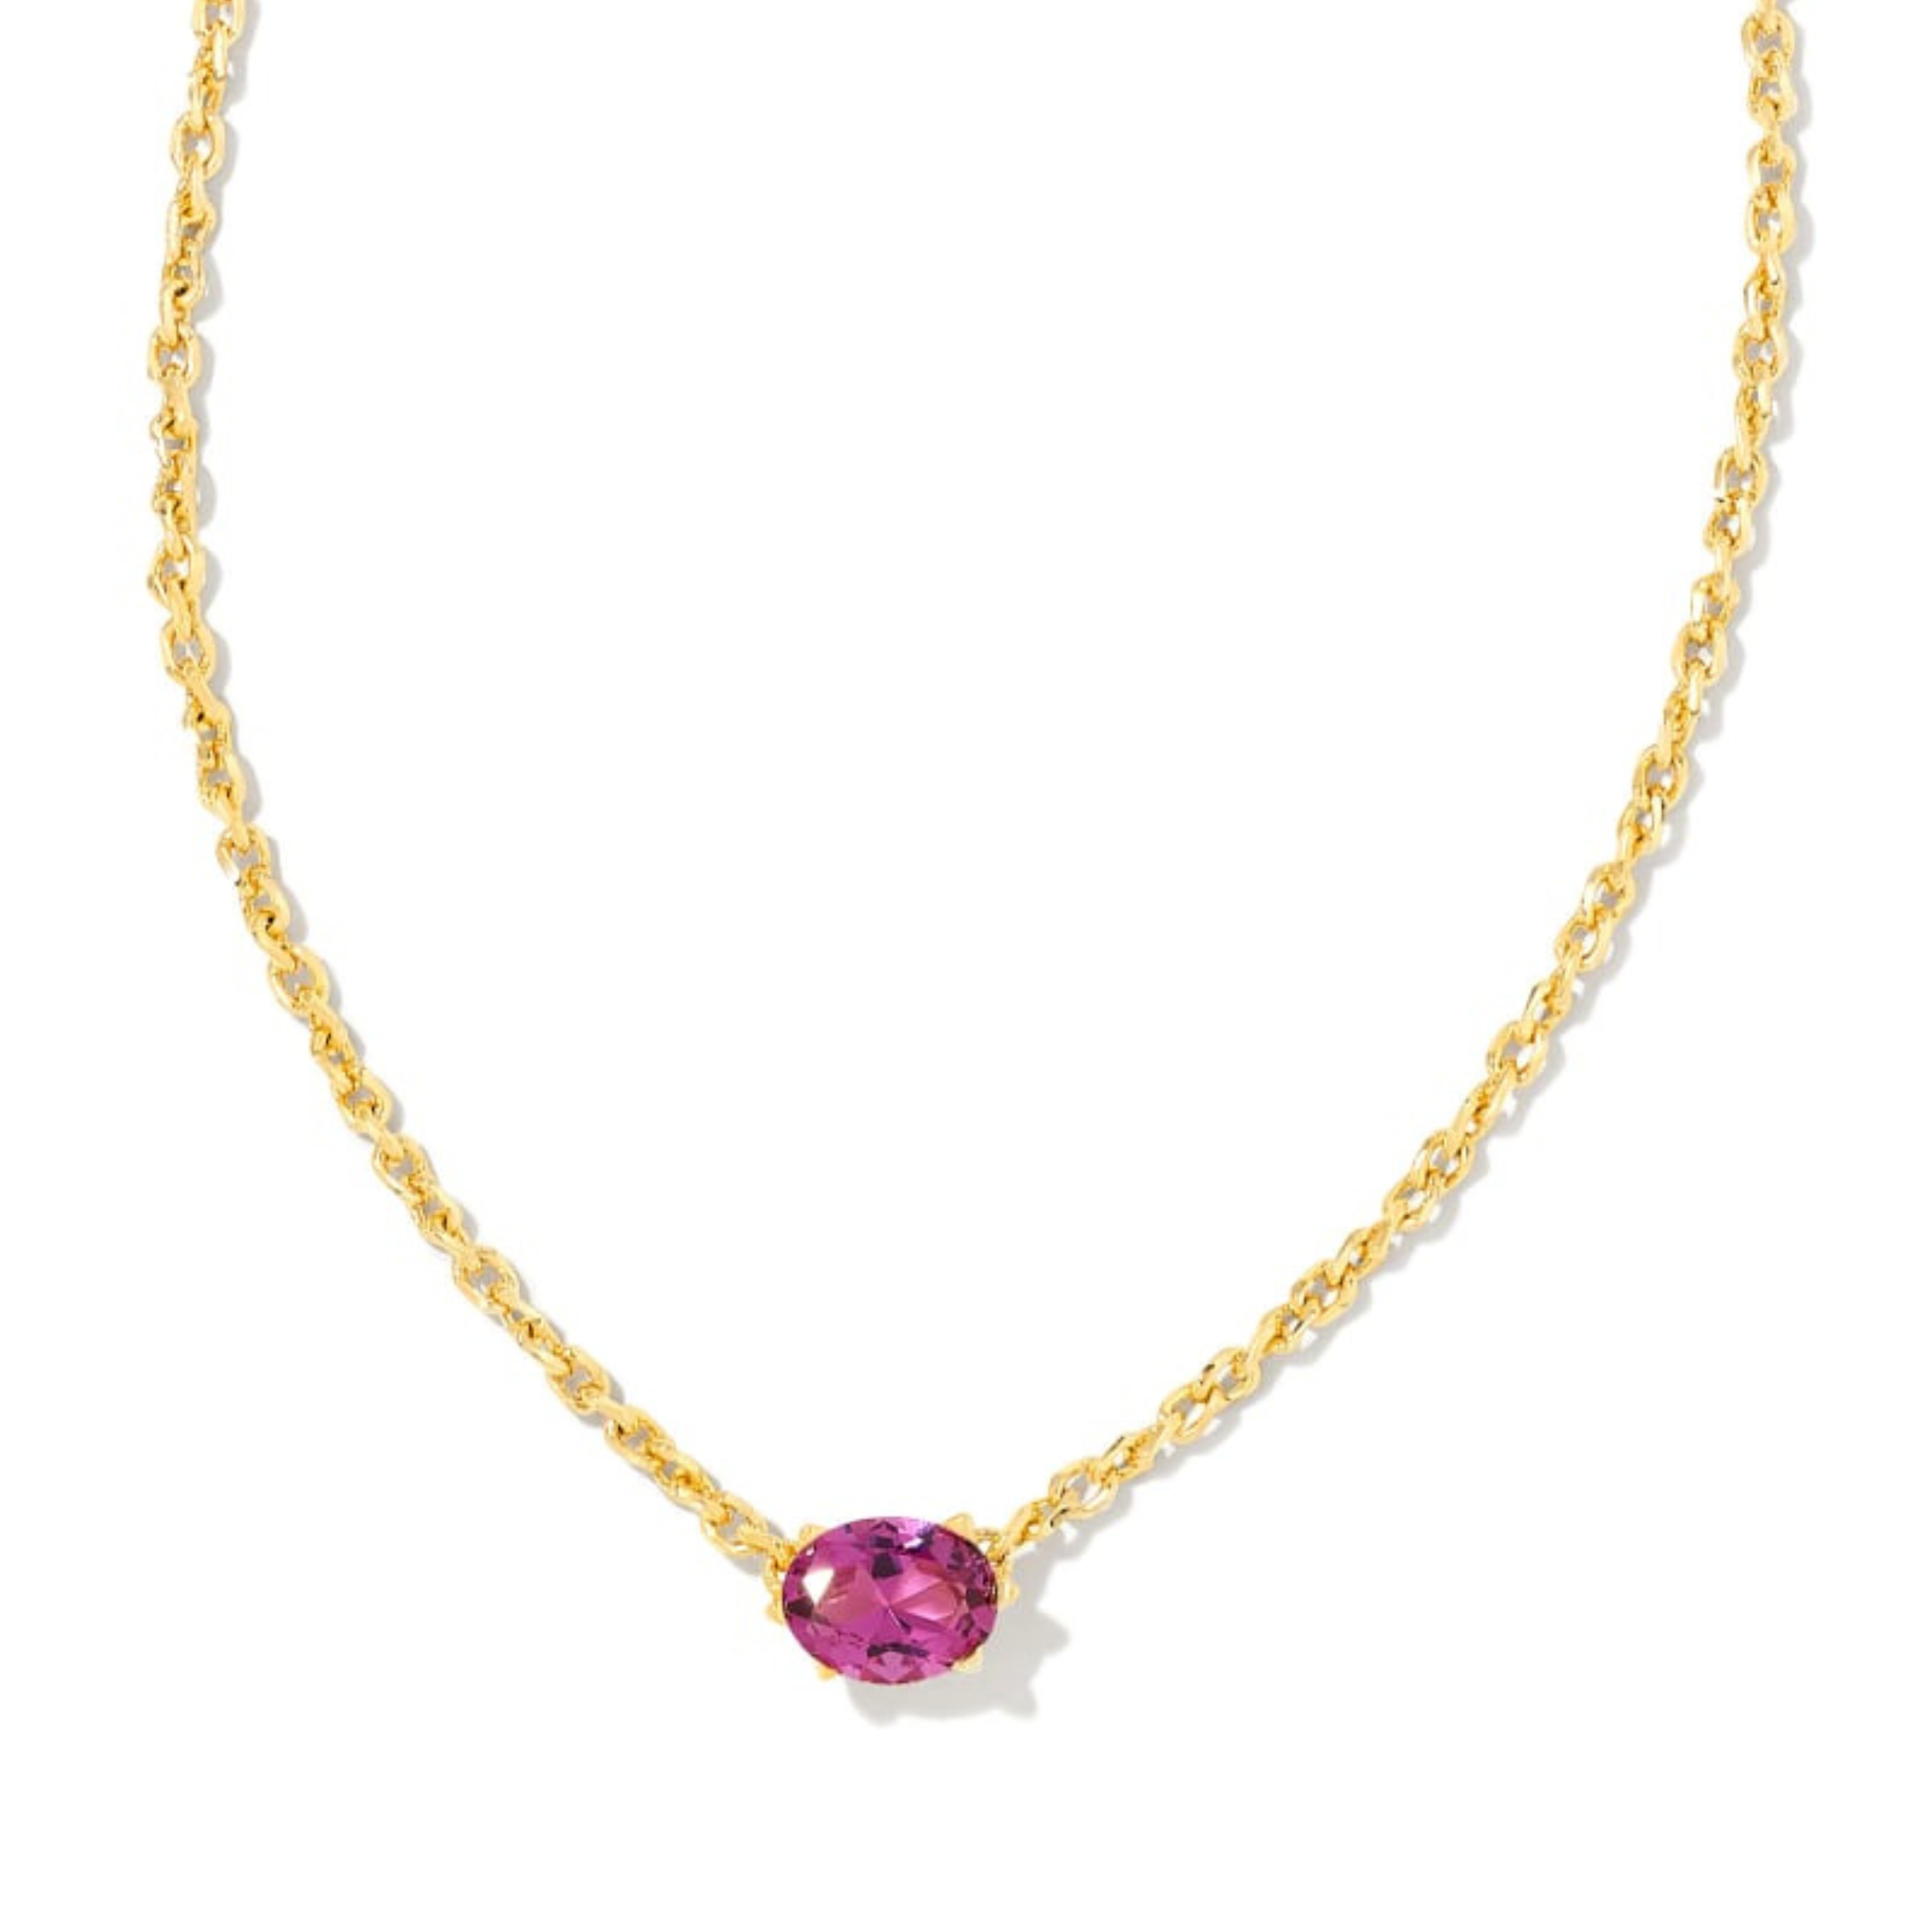 Gold chain necklace with a purple crystal pendant, pictured on a white background.